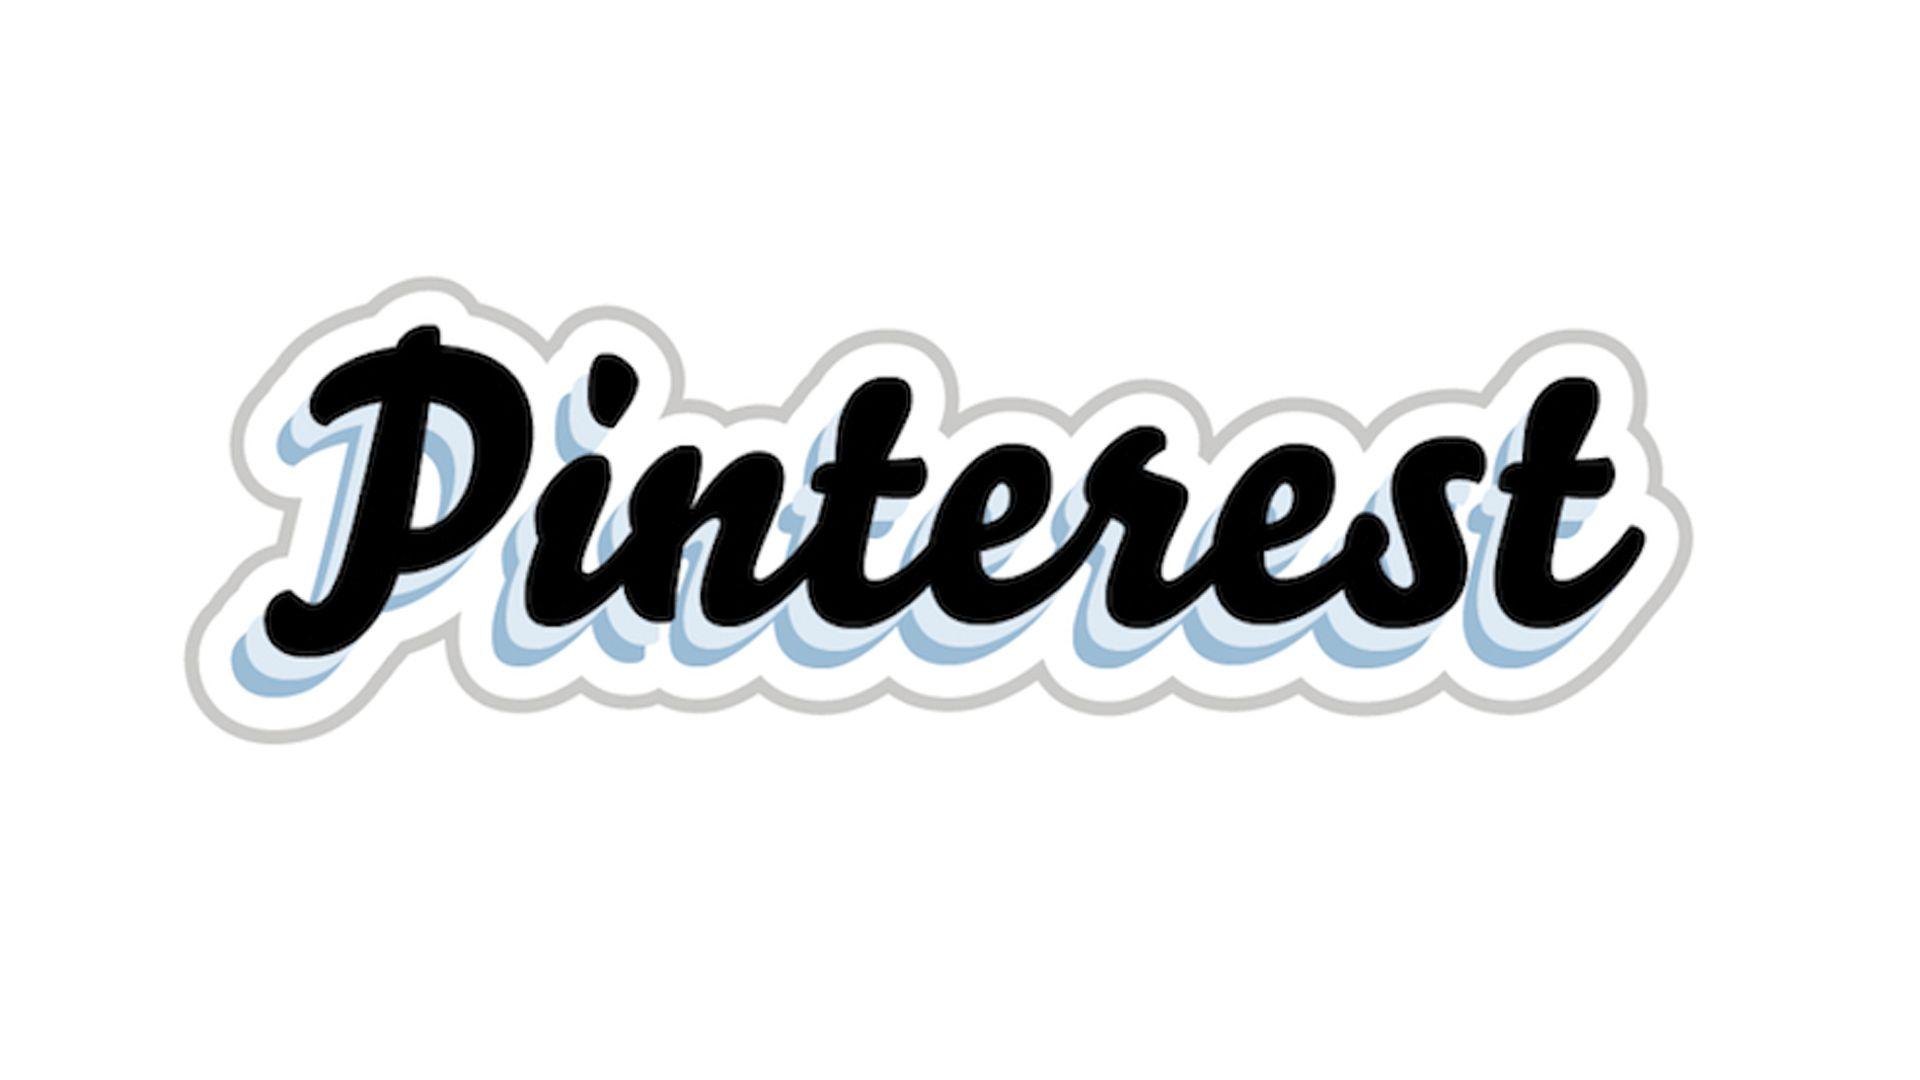 Pintrst Logo - Meaning Pinterest logo and symbol | history and evolution